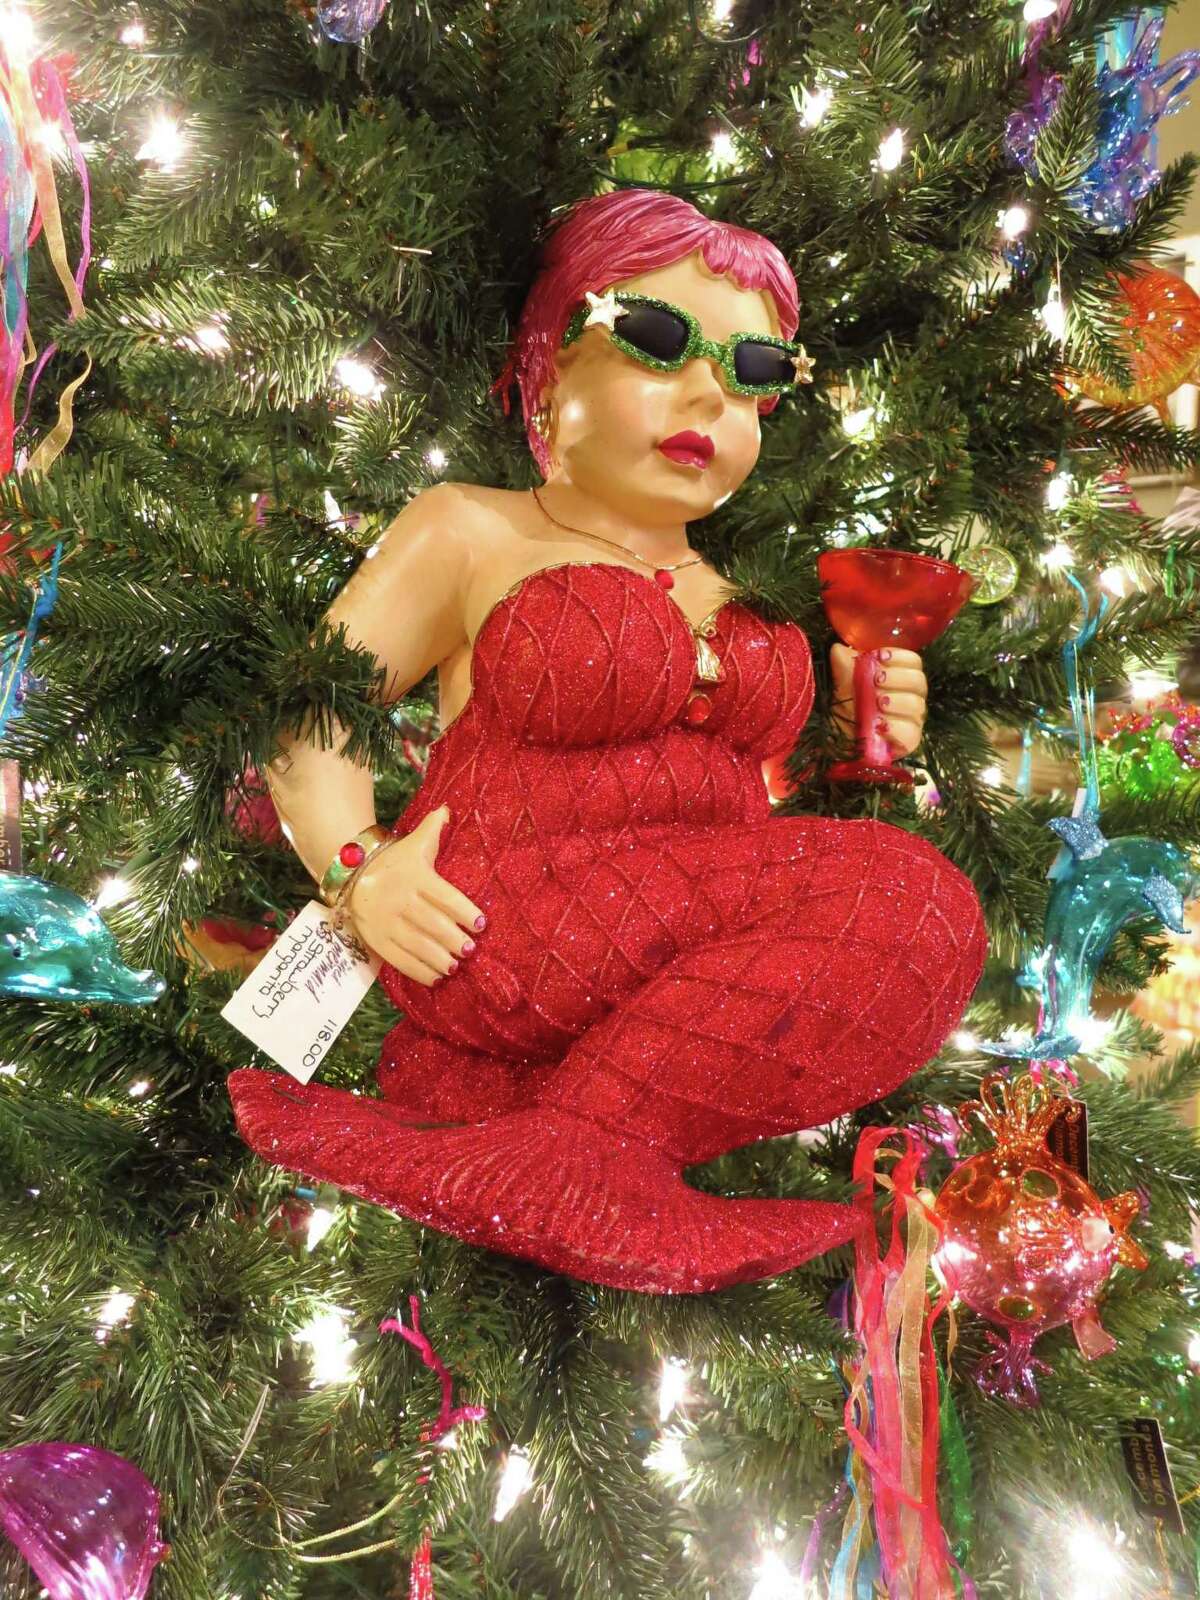 The shop is called The Naked Mermaid, but this mermaid tree ornament comes all decked out in holiday finery in Galveston.